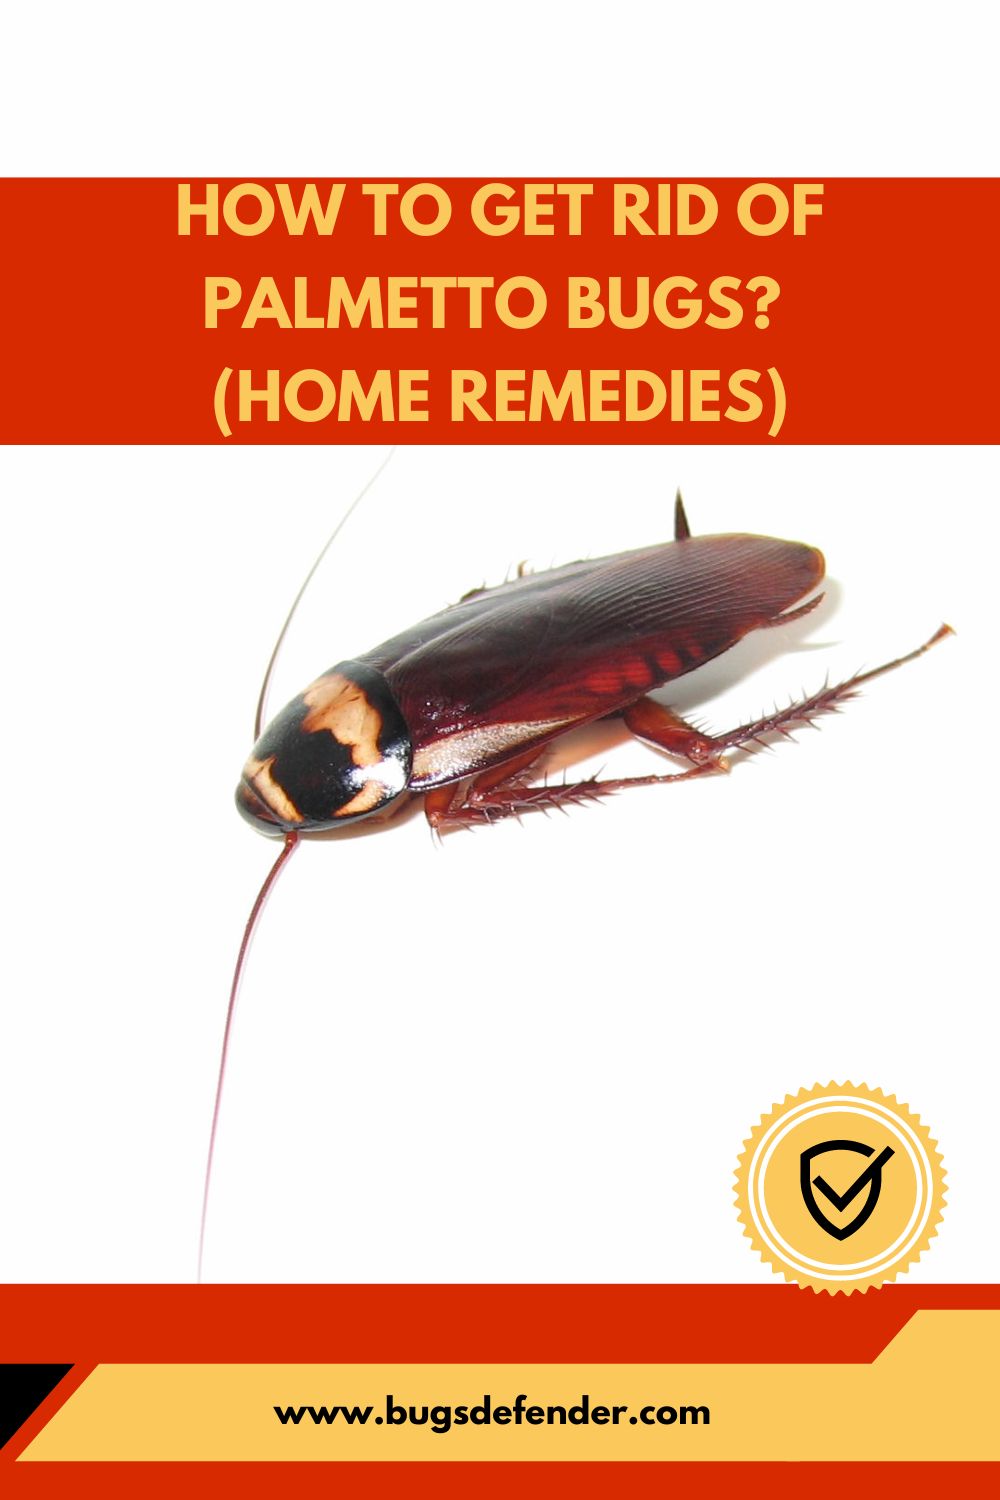 How To Get Rid Of Palmetto Bugs? (Home Remedies) pin 1